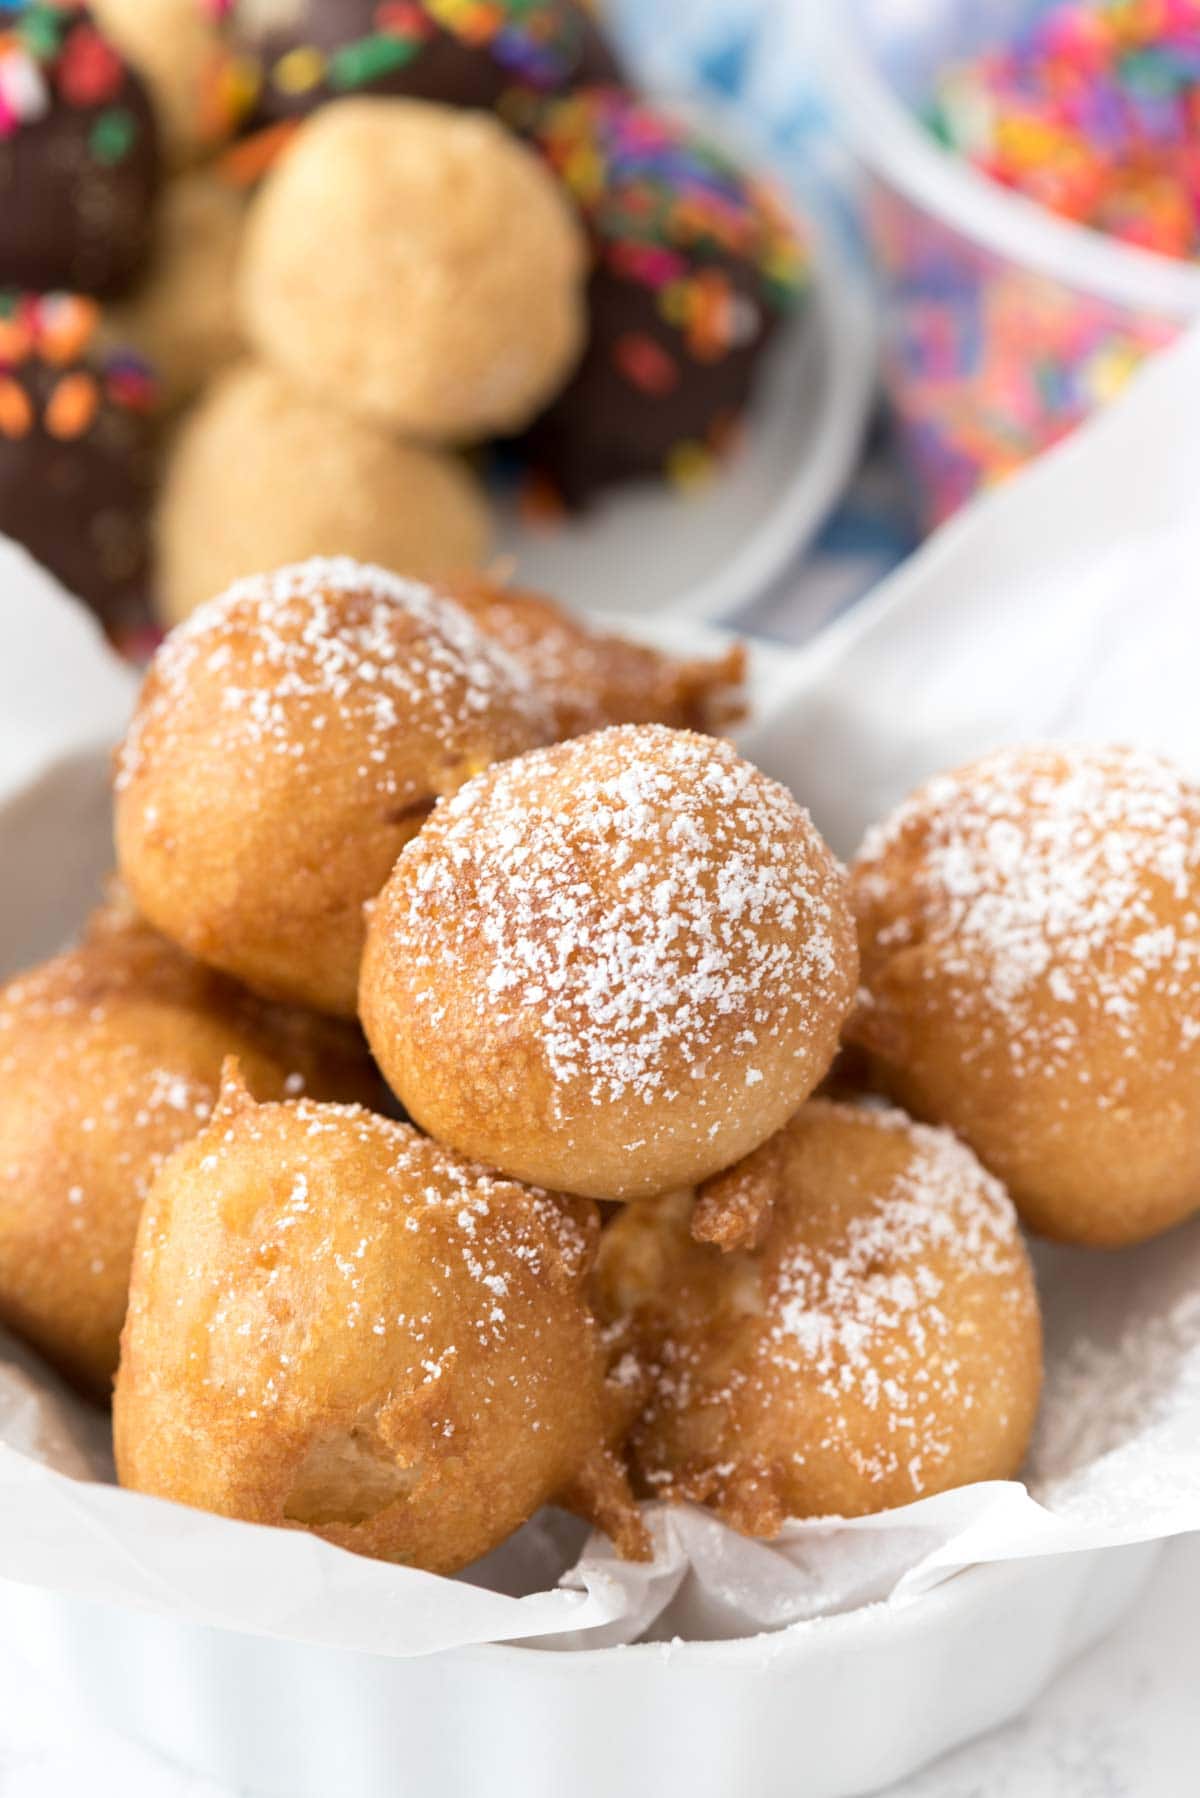 No Bake Cheesecake Truffles - deep fried cheesecake bites just like you get at the fair! It's such an easy recipe to make at home.